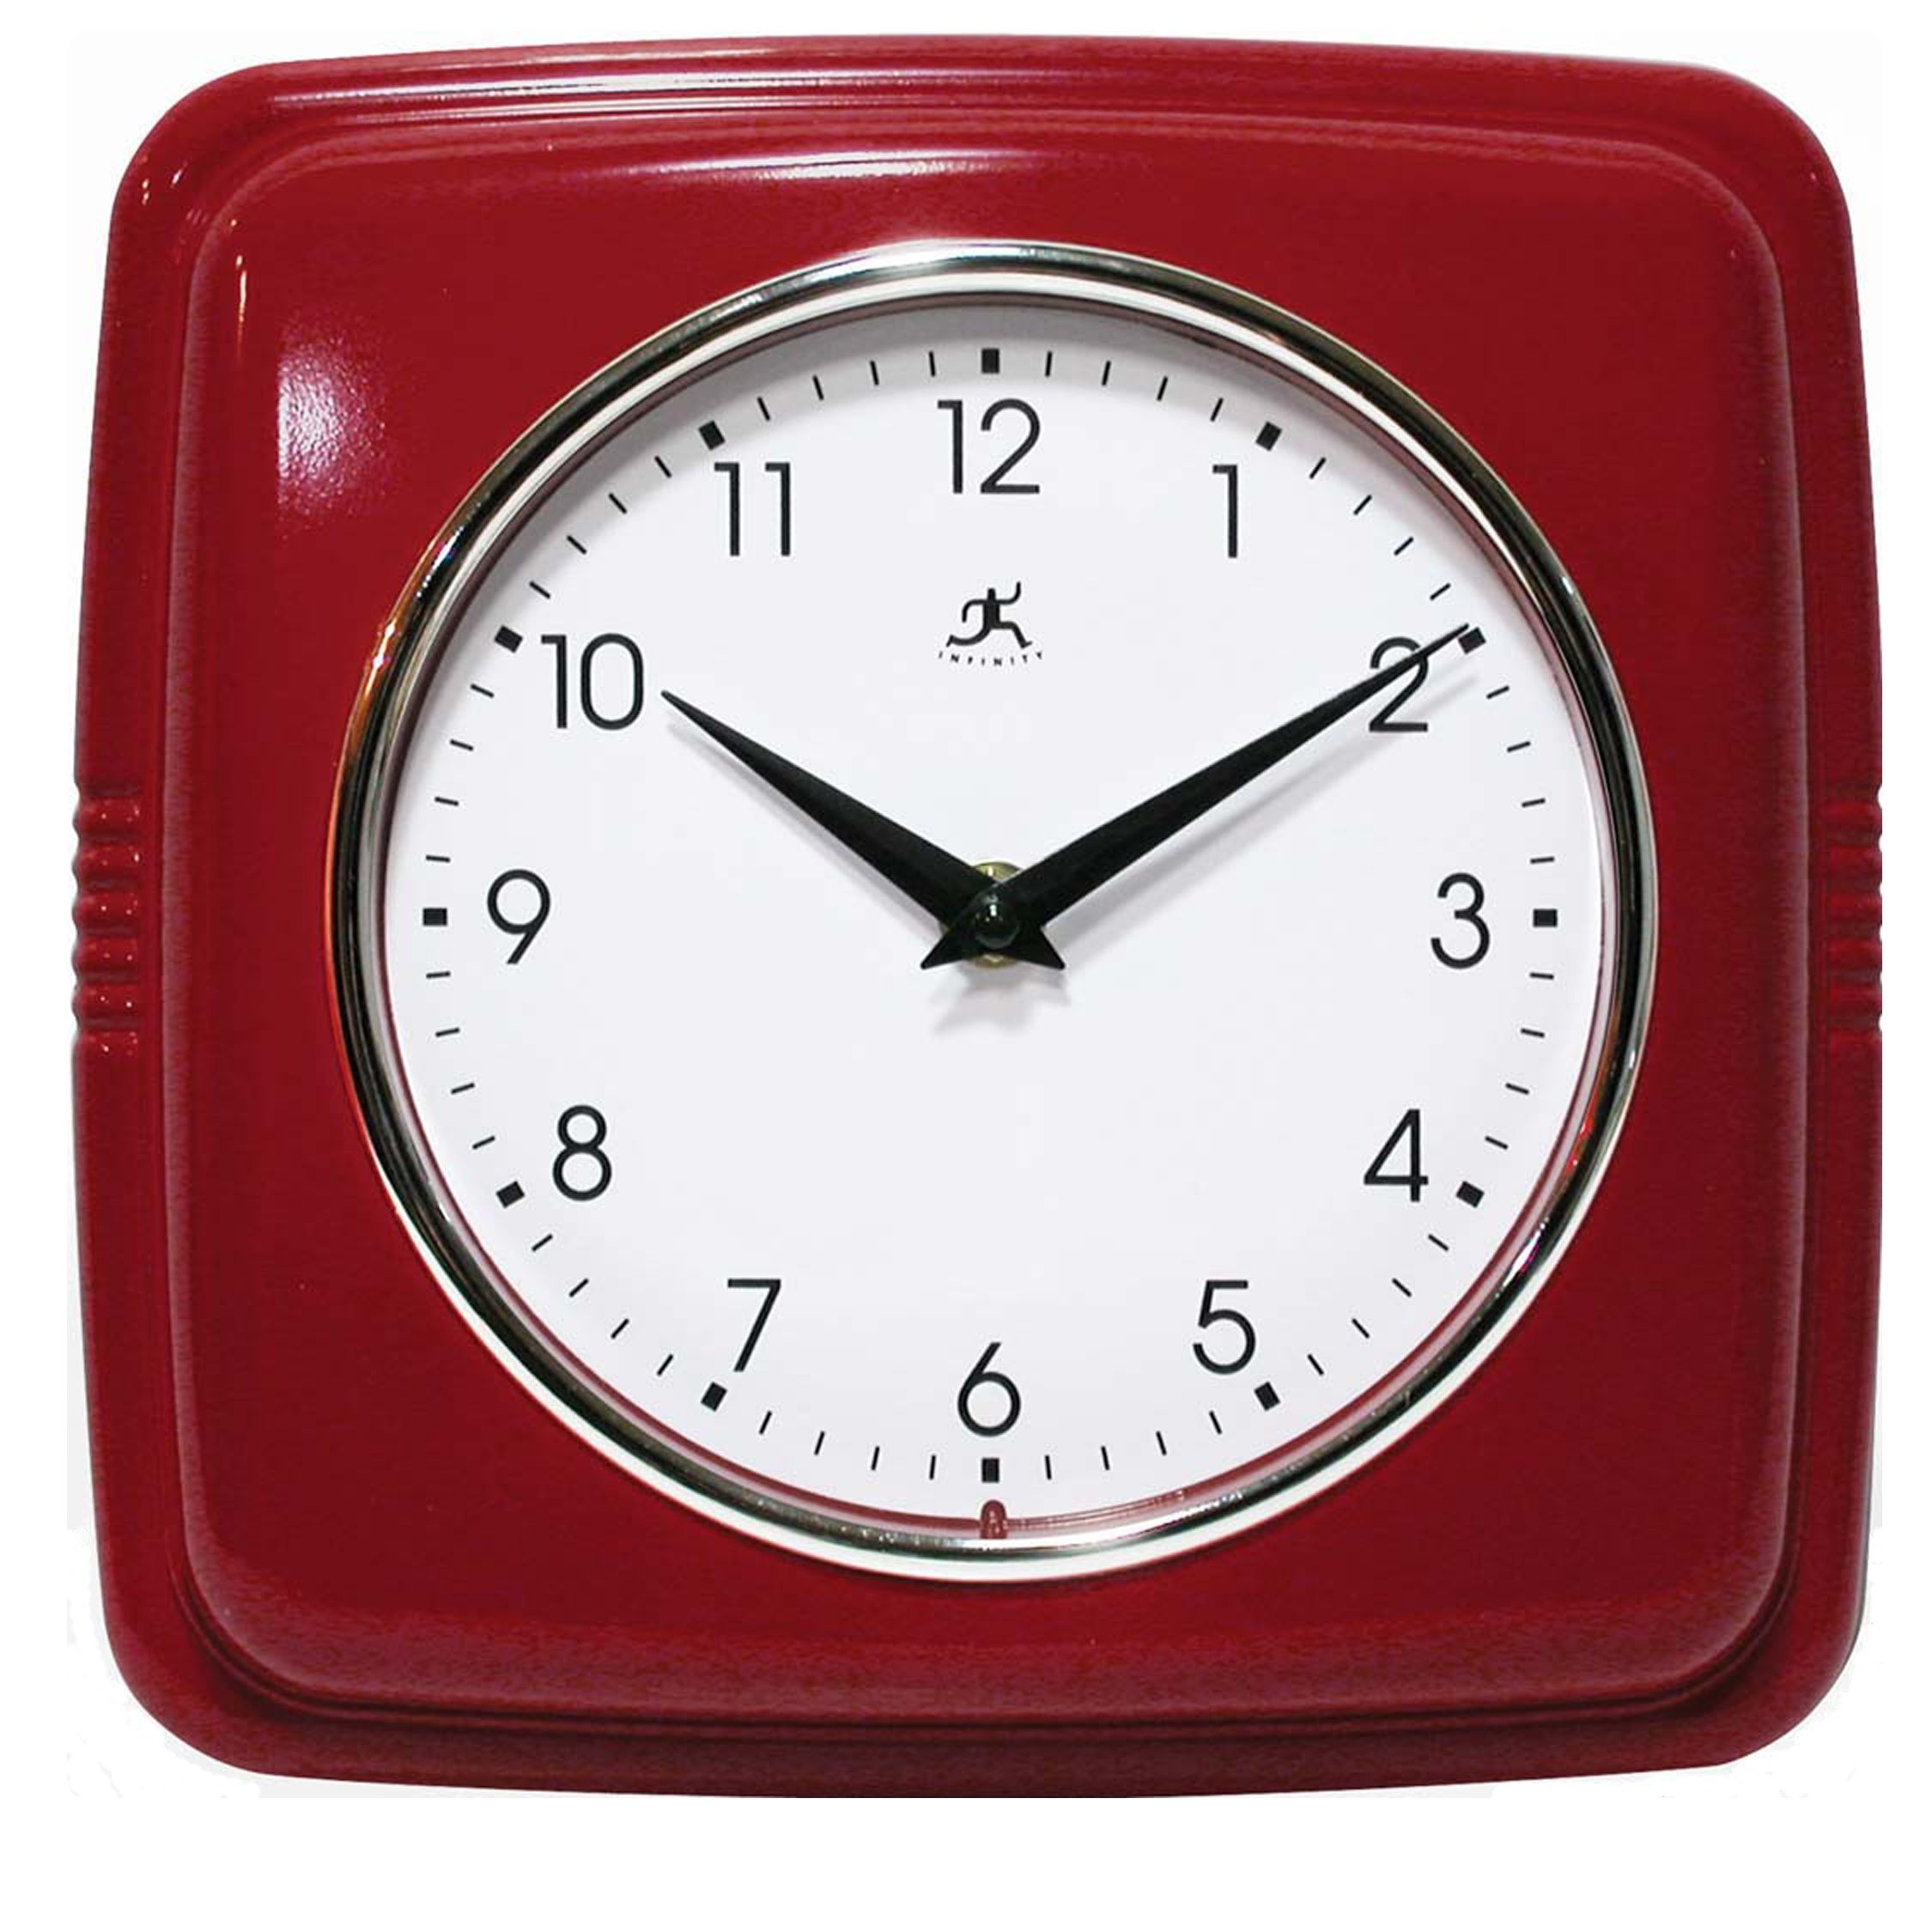 Infinity Instruments Purity-9" Resin Wall Clock